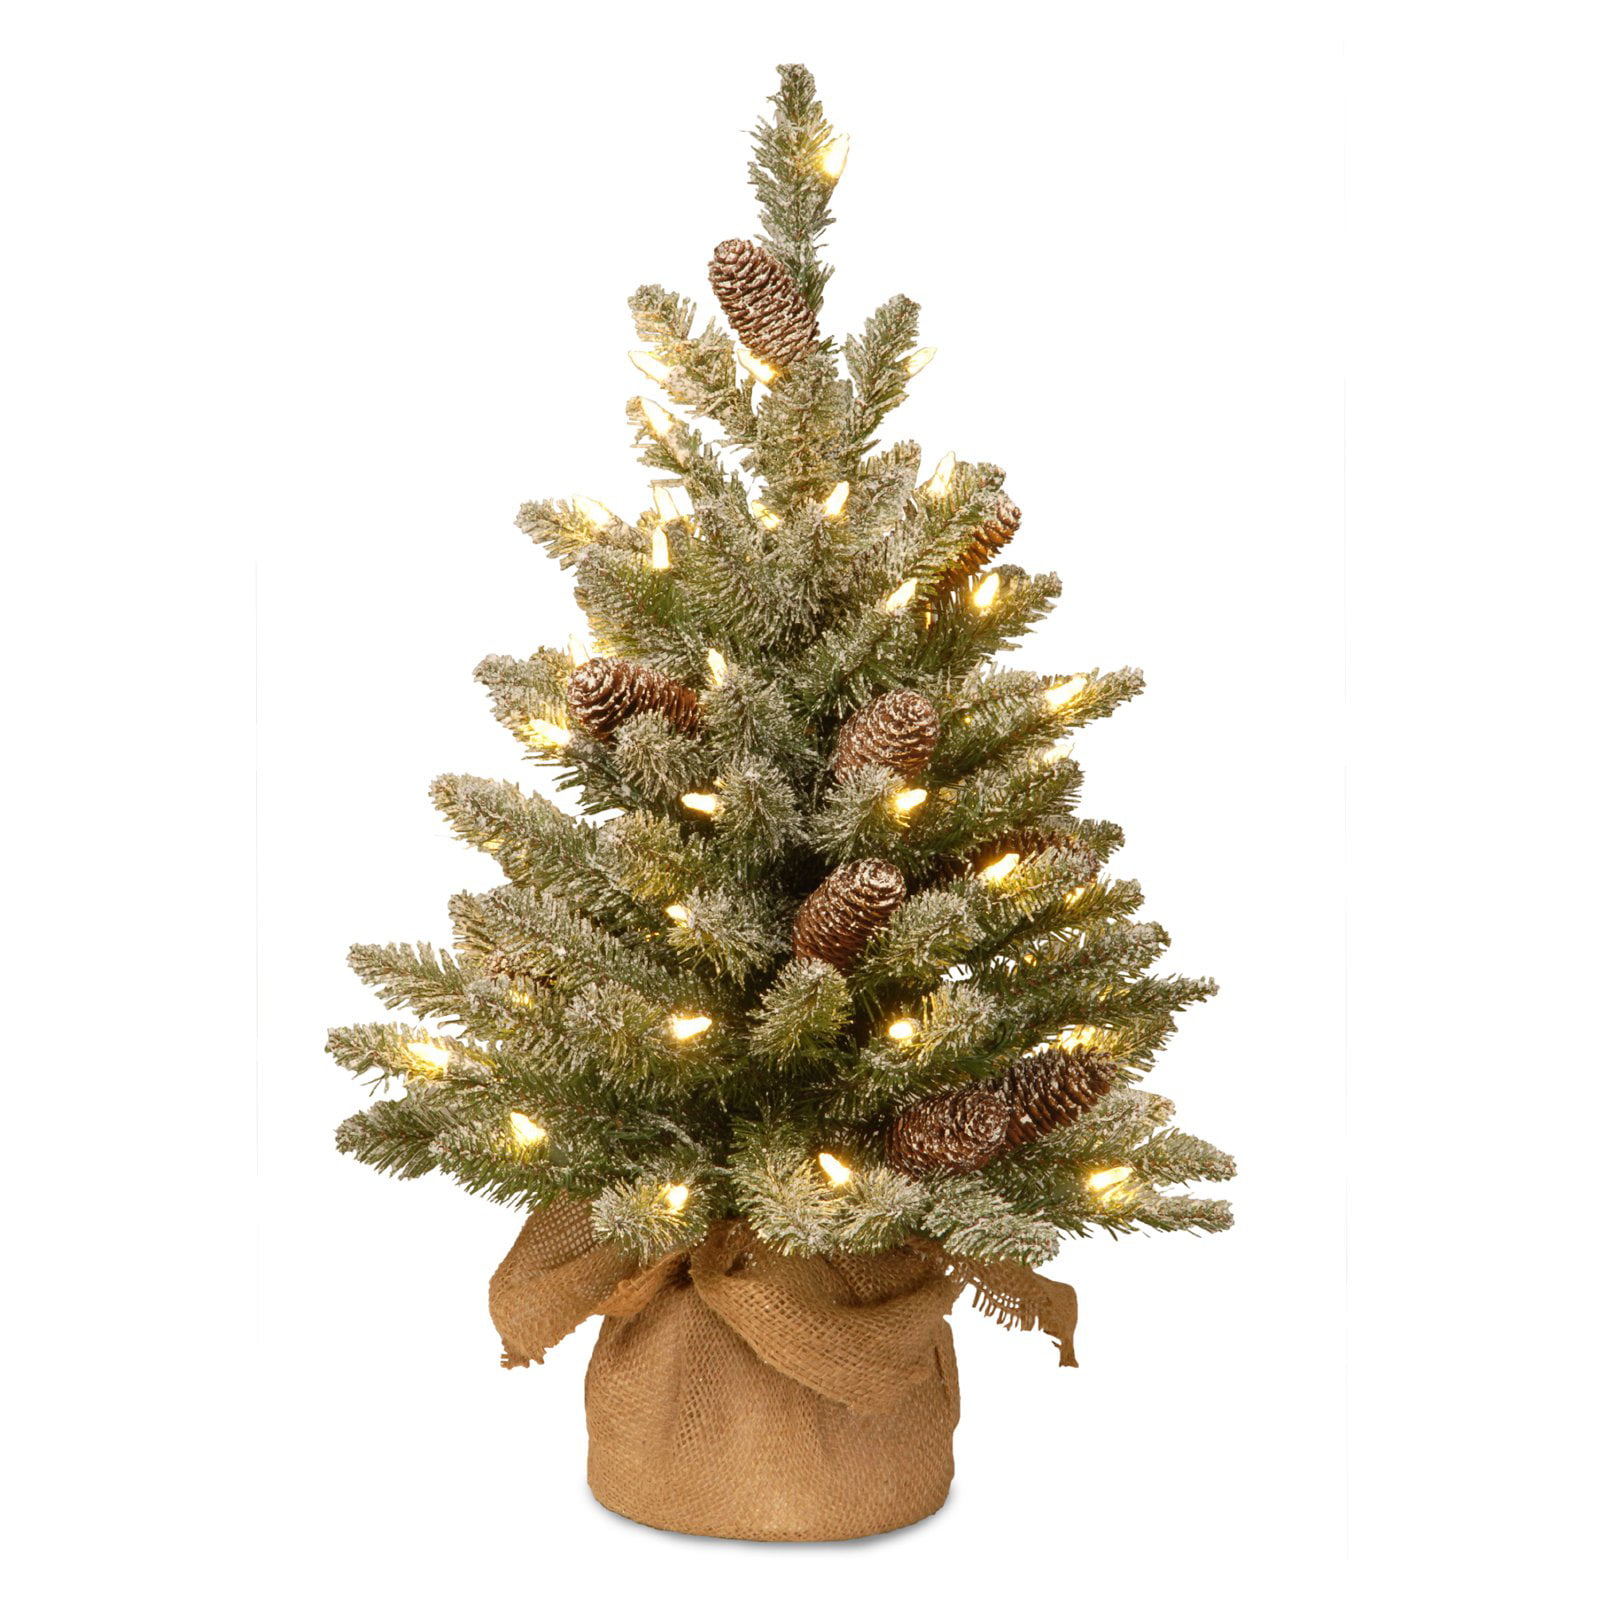 Snowy Concolor Fir Small Christmas Tree in Burlap with Snowy Cones 